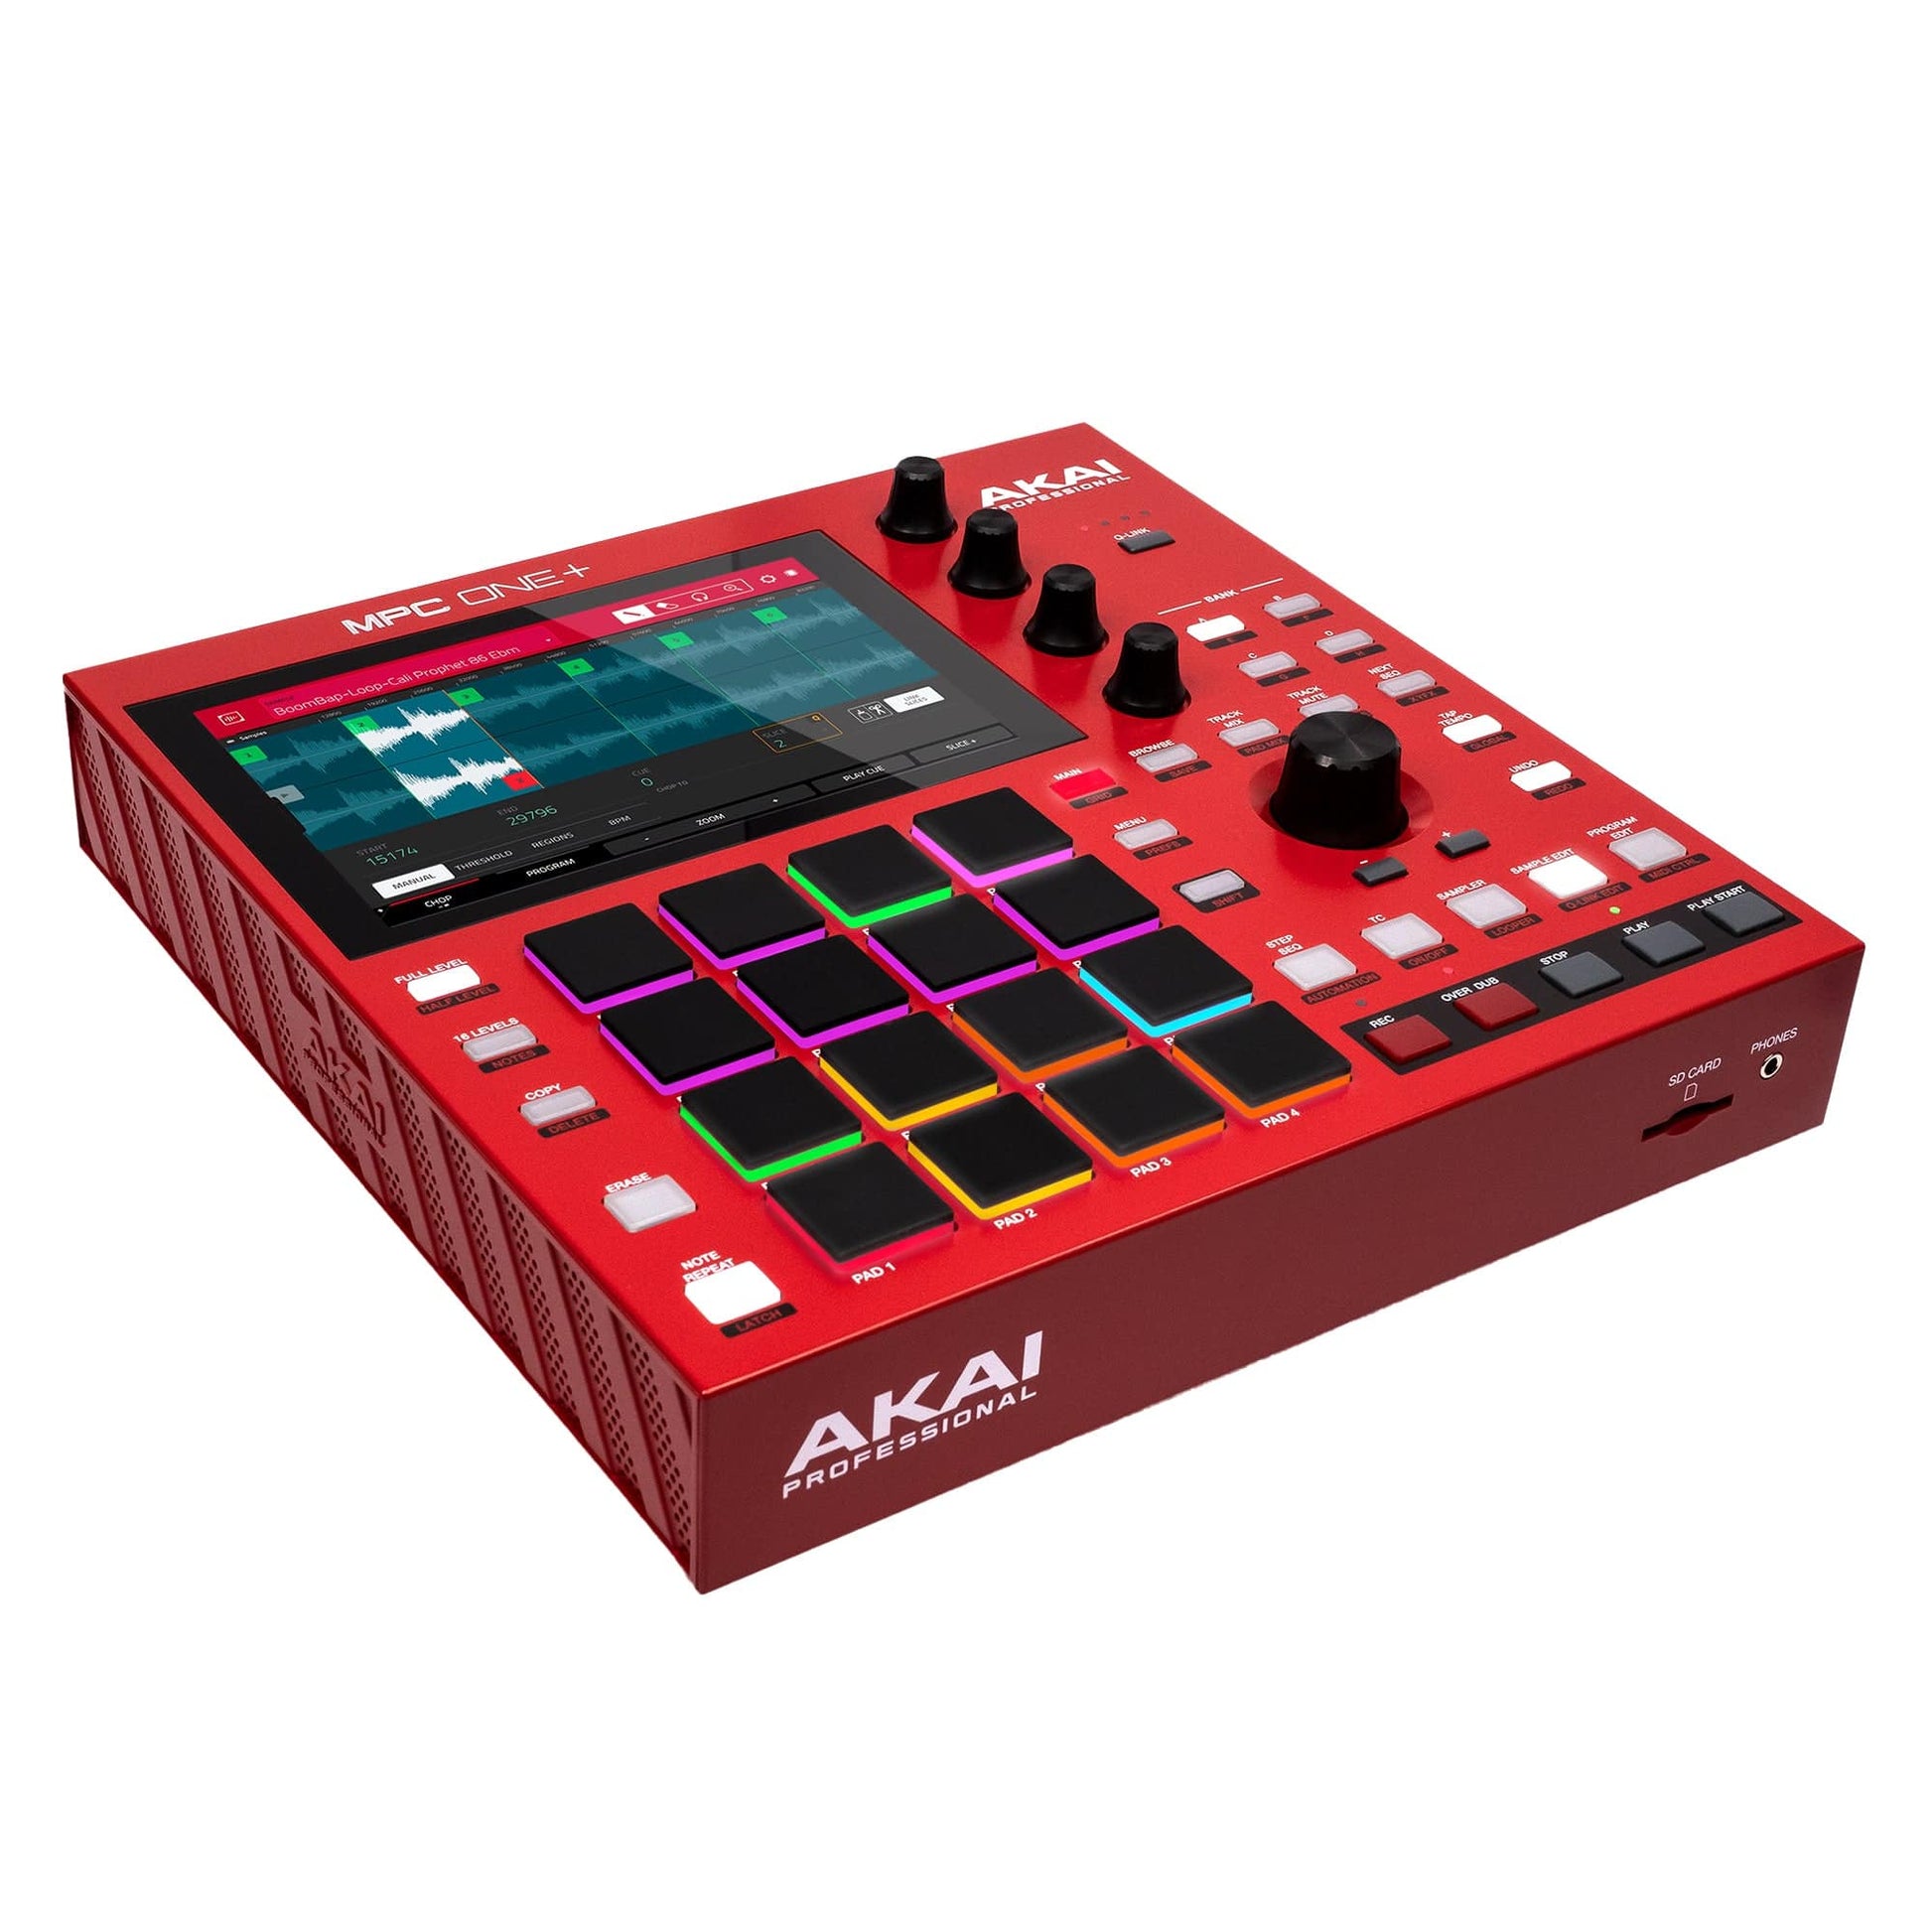 Akai MPC One + Standalone Music Production Center Effects and Pedals / Controllers, Volume and Expression